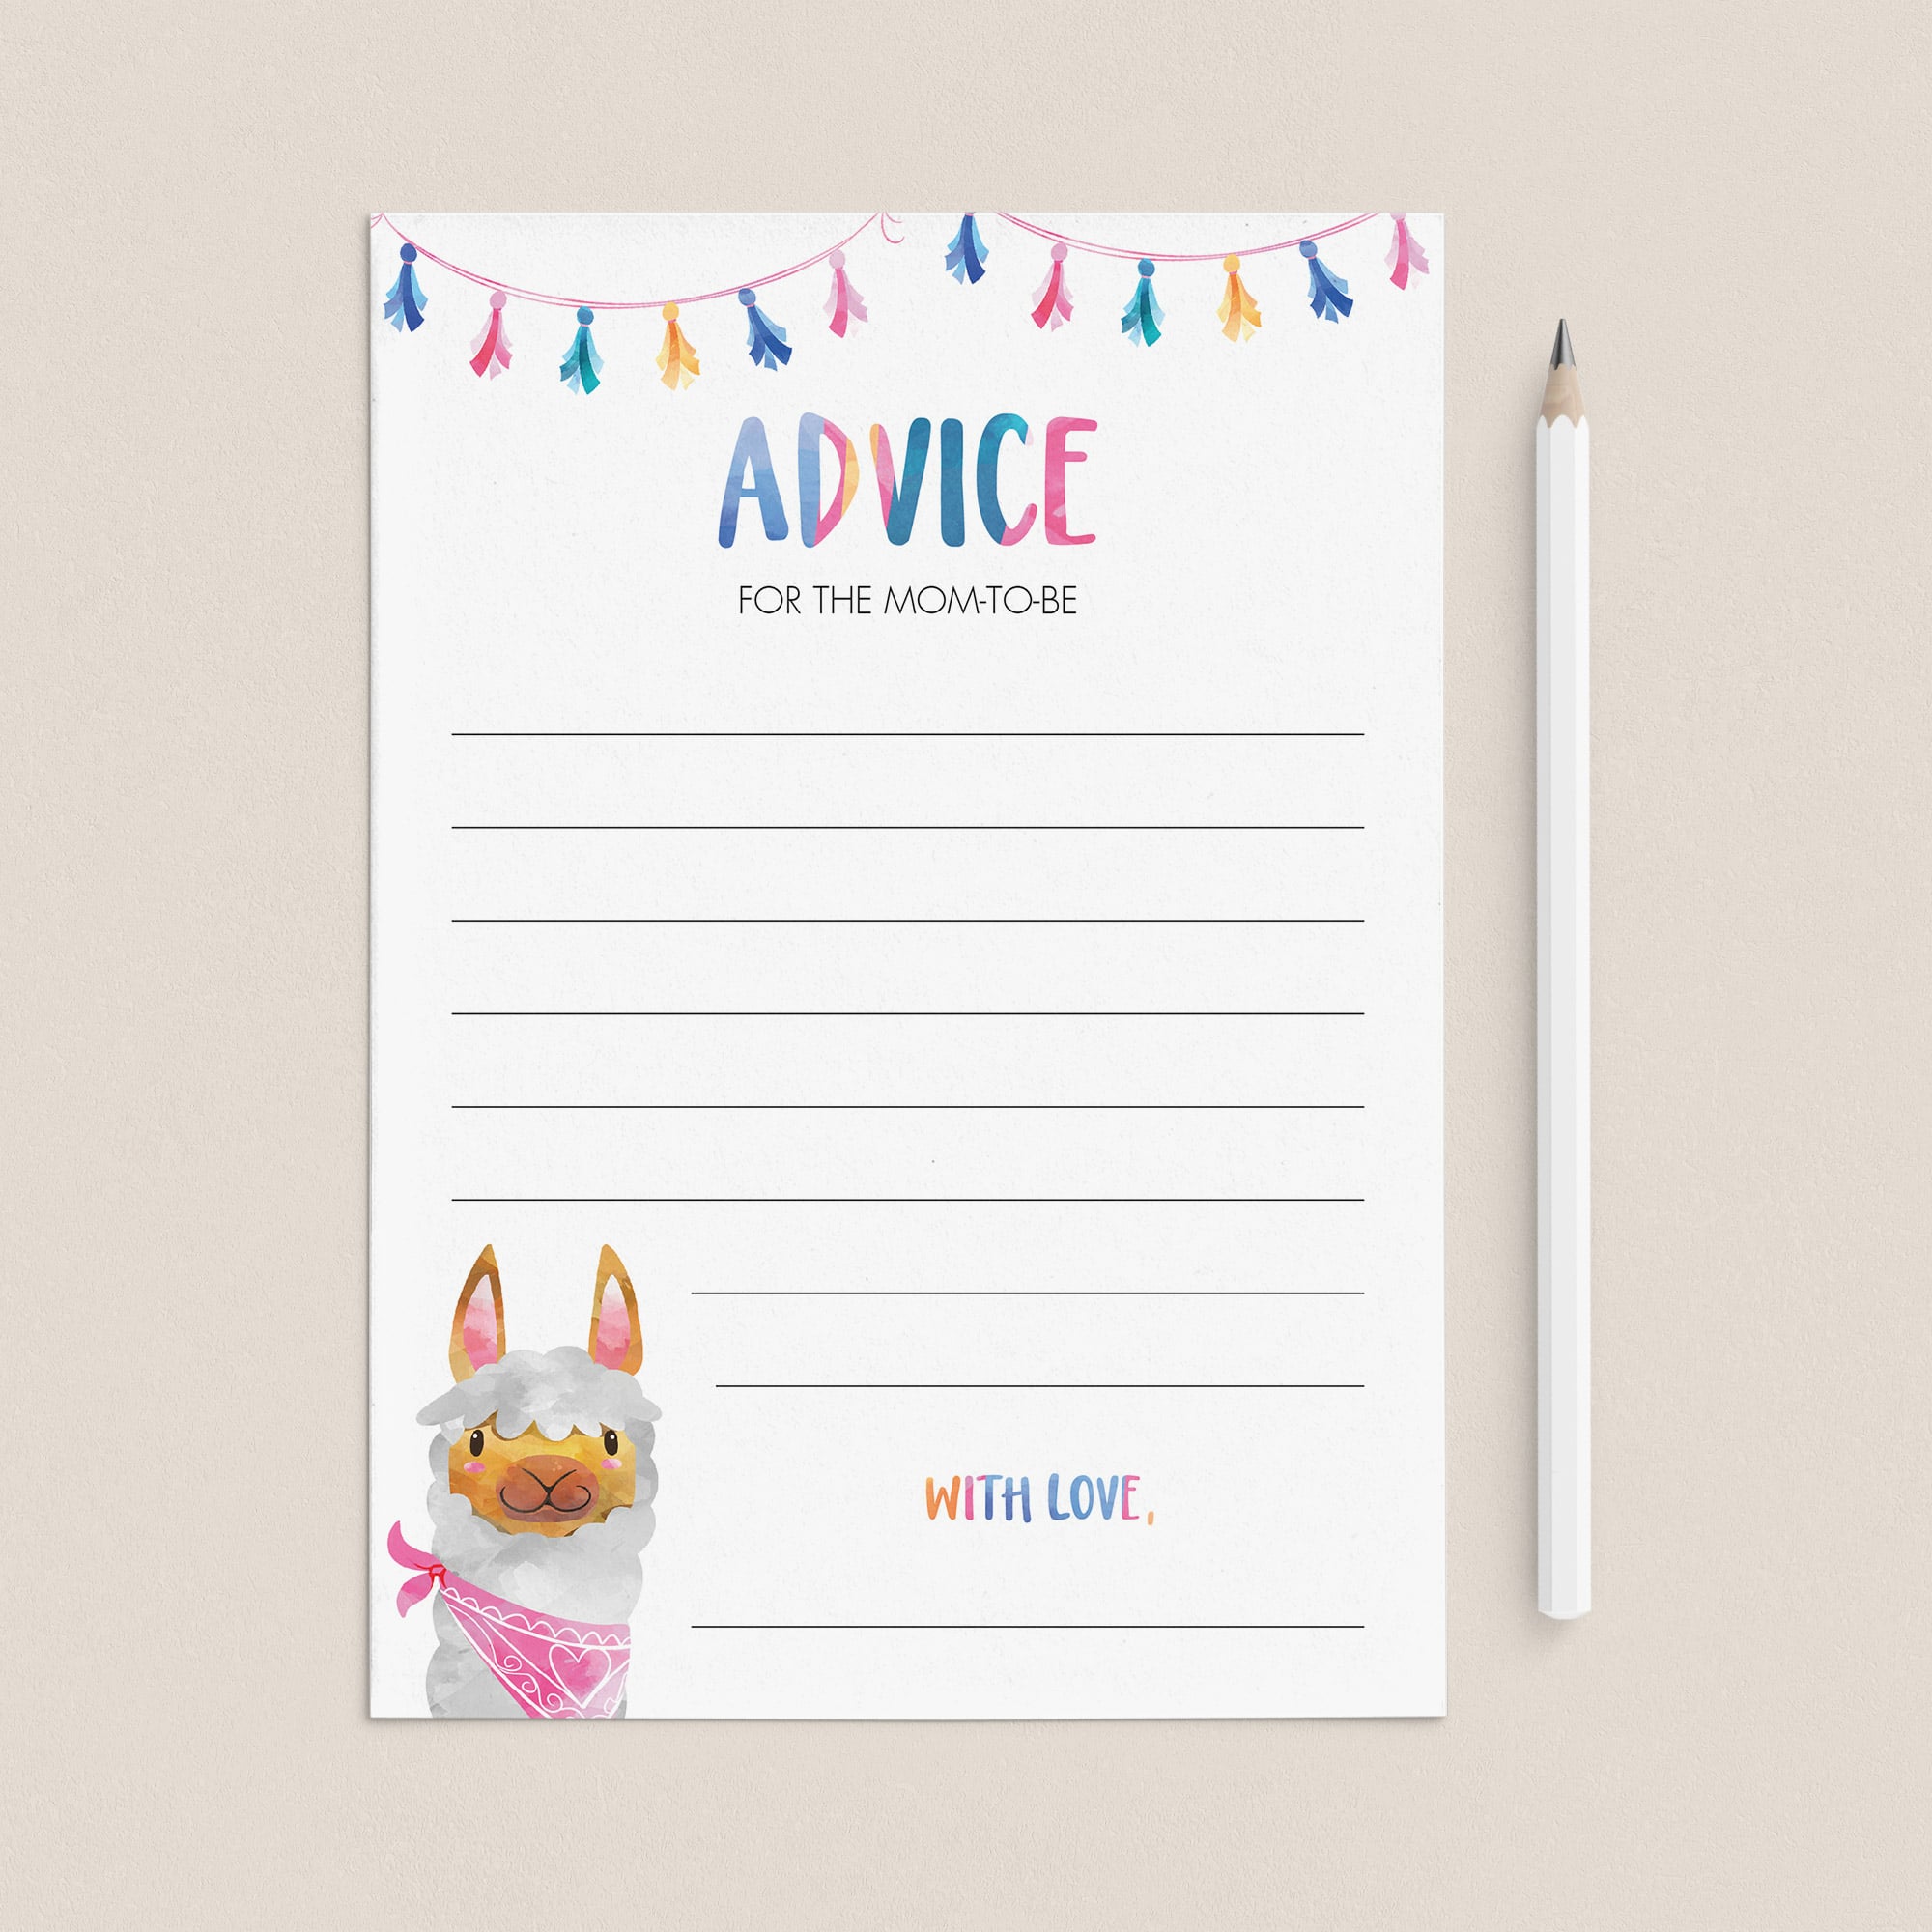 Alpaca baby shower game printable advice cards by LittleSizzle